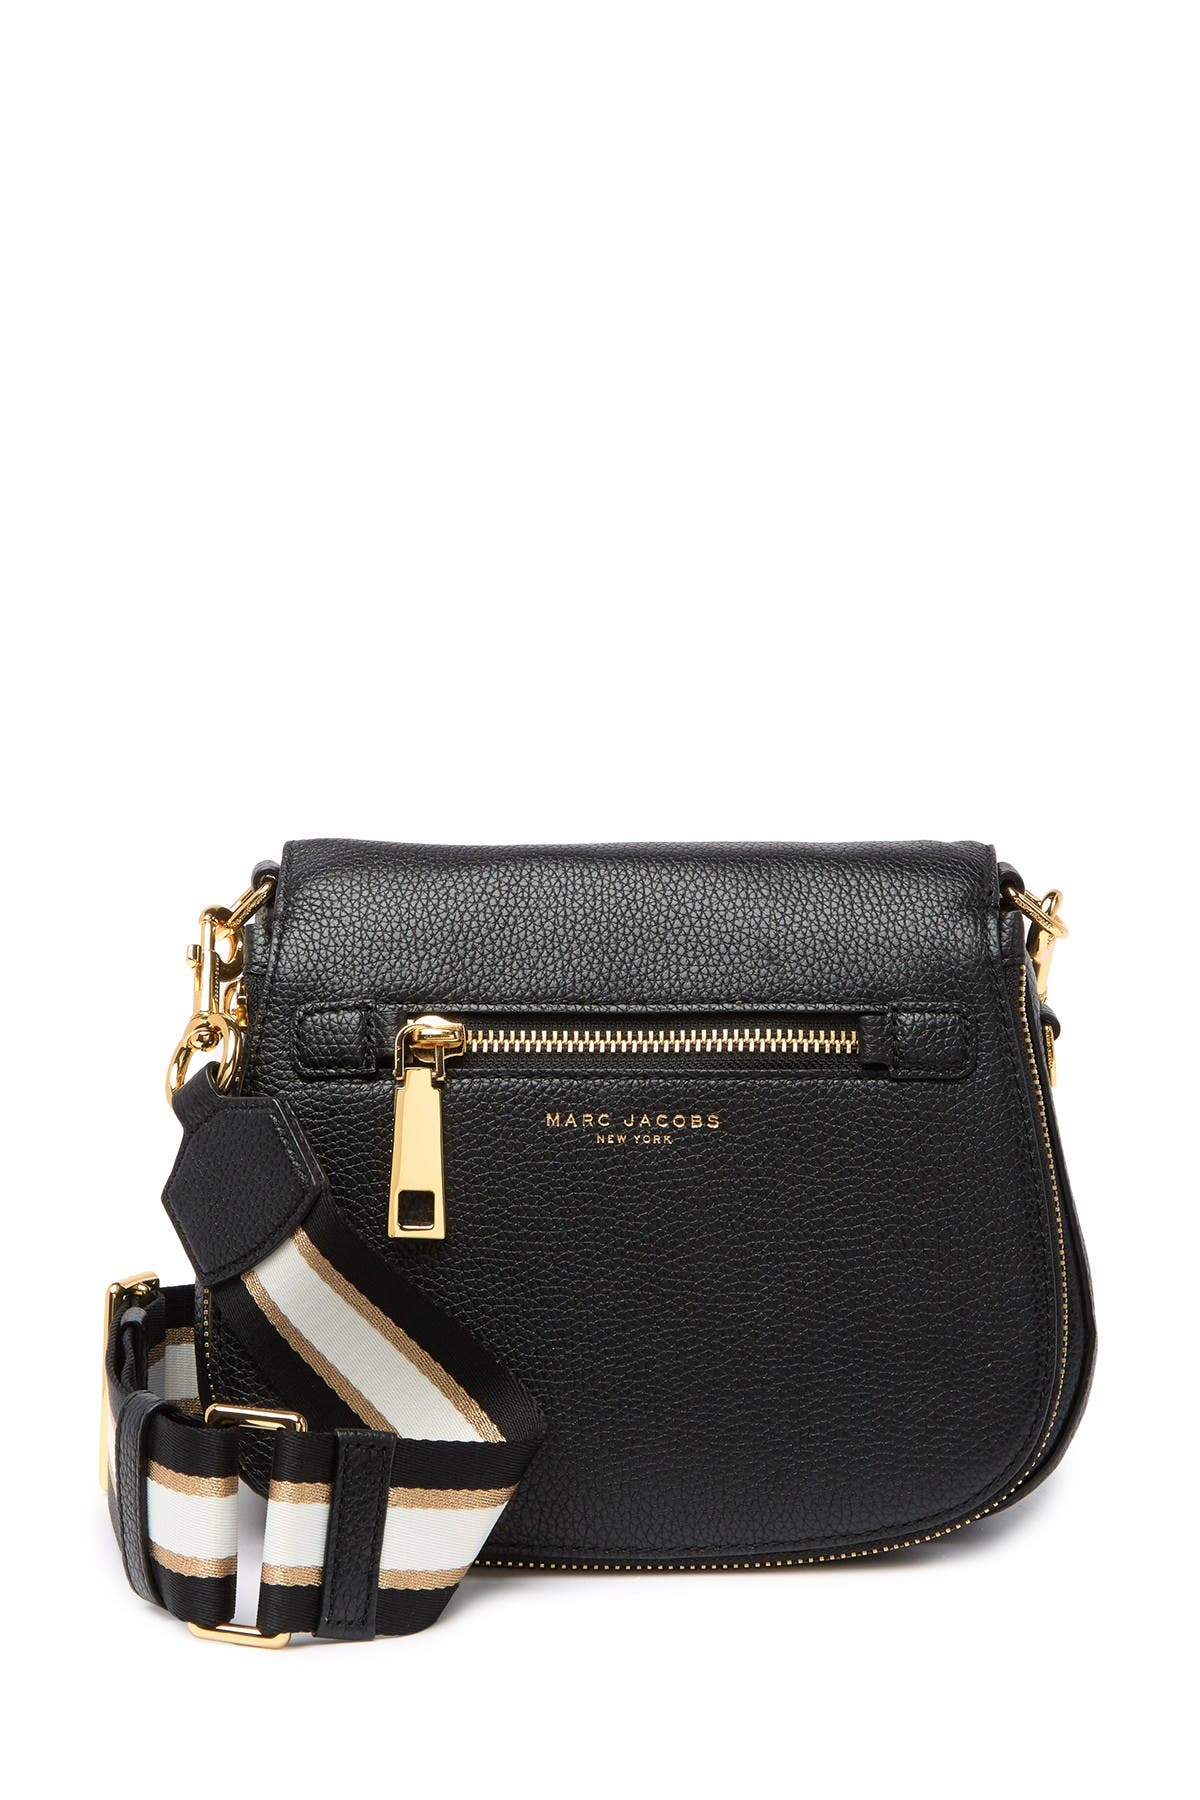 marc jacobs nomad